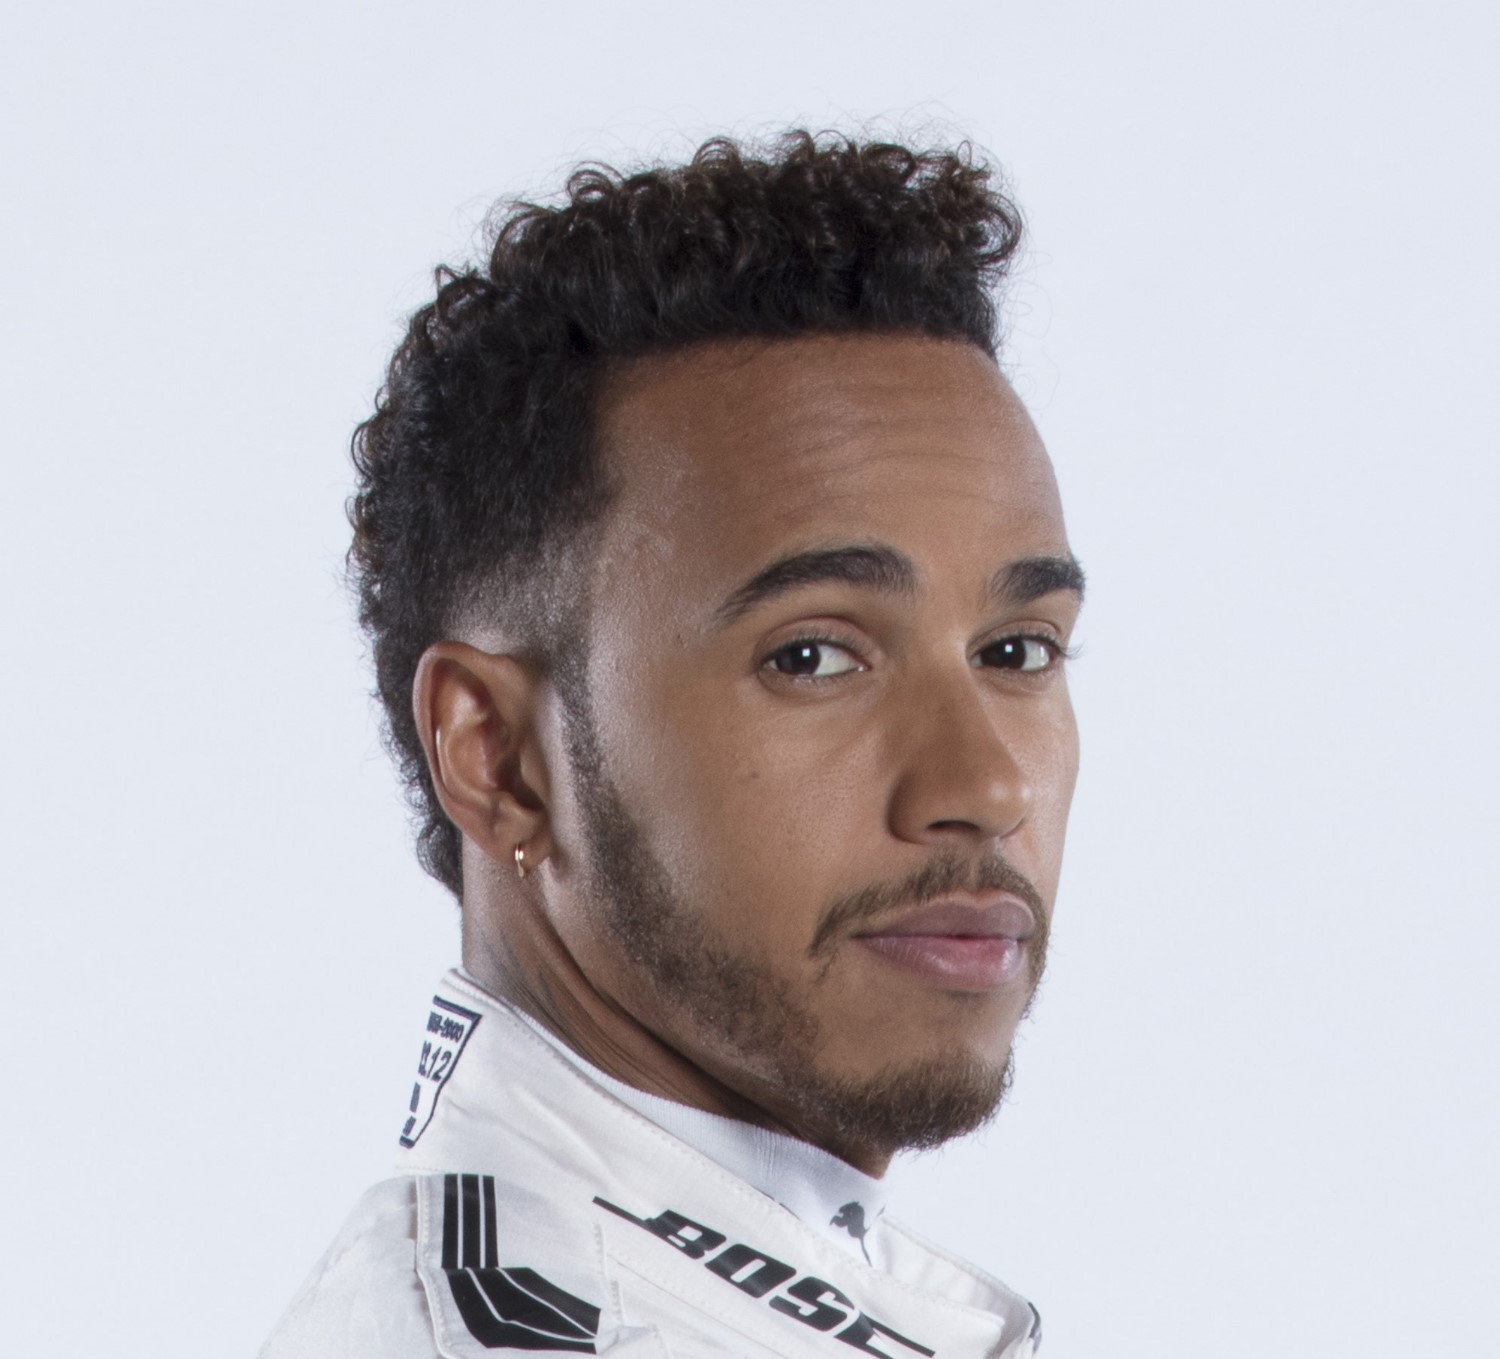 Of course Hamilton will stay at Mercedes. You don't walk away from Aldo Costa designed cars